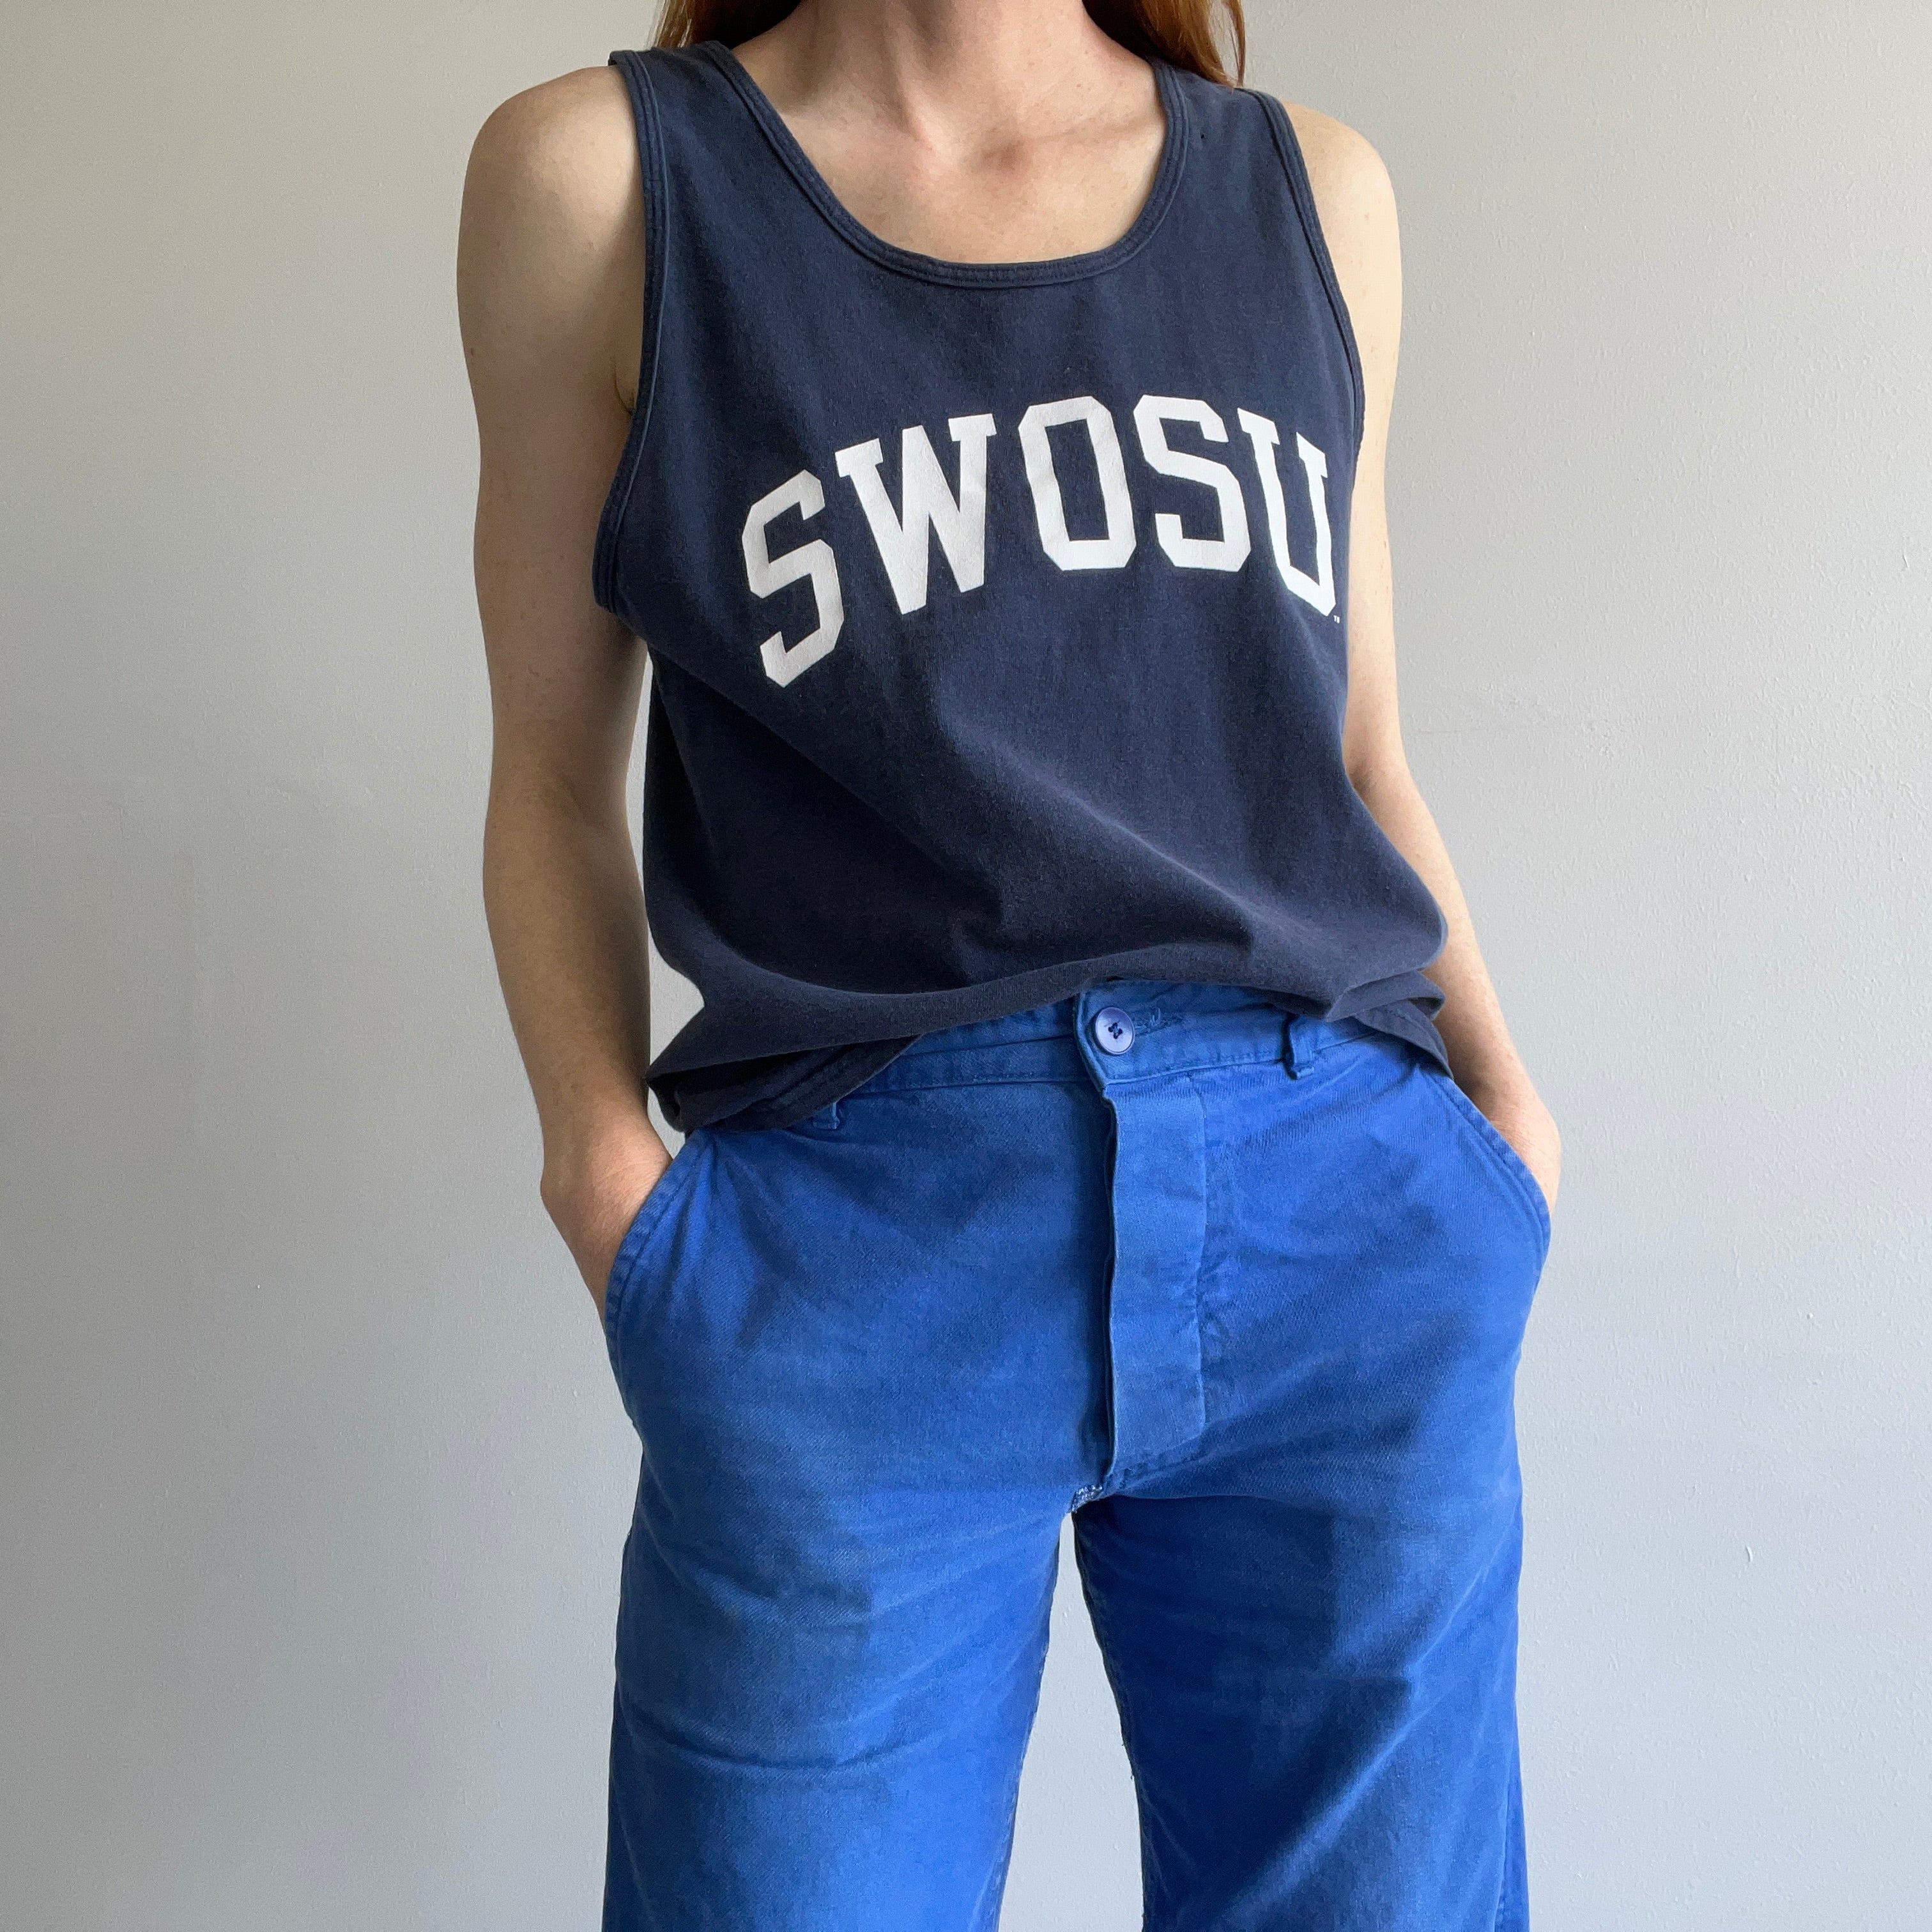 1980s South Western State University Cotton Tank Top